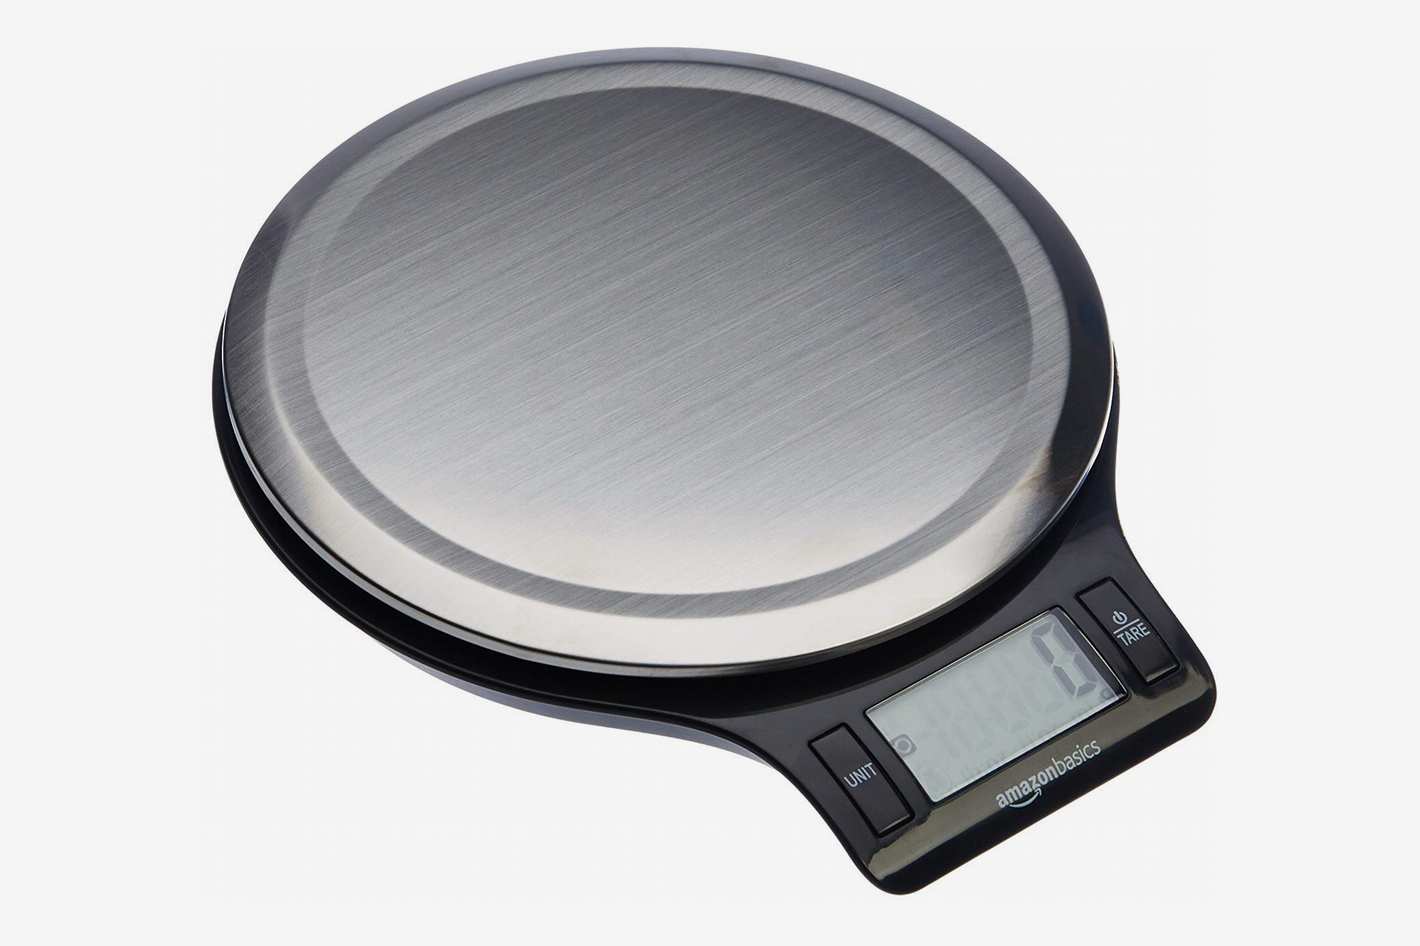 15 Best Kitchen Scales And Food Scales On Amazon 2019